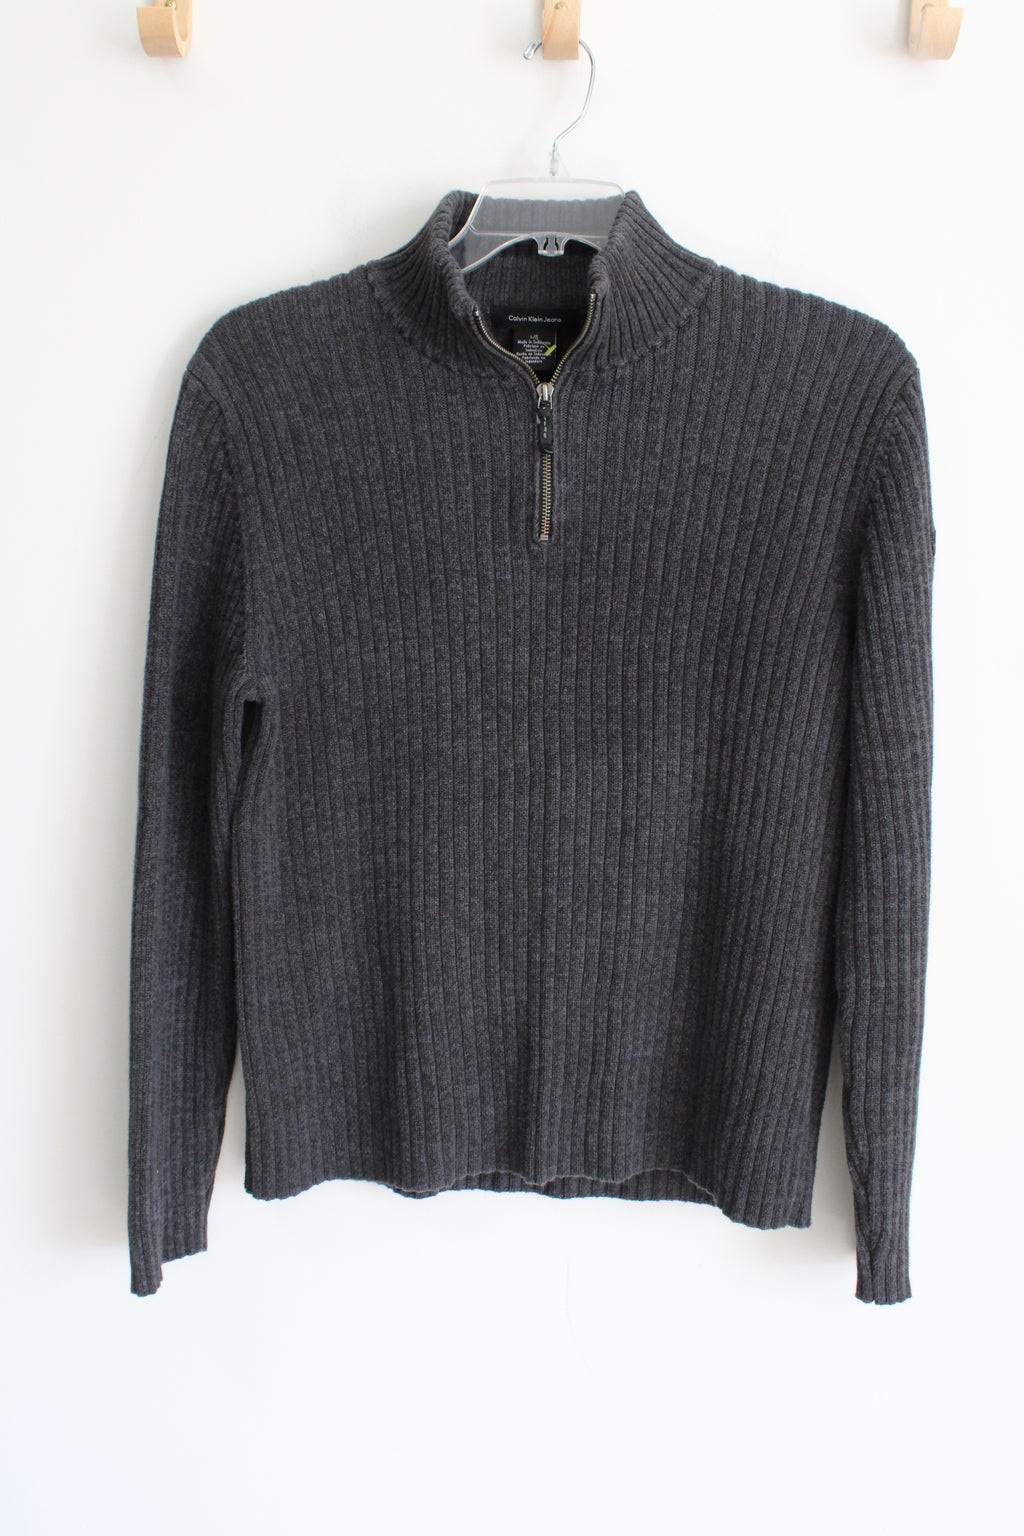 Calvin Klein Jeans Gray Ribbed 1/4 Zip Sweater | L